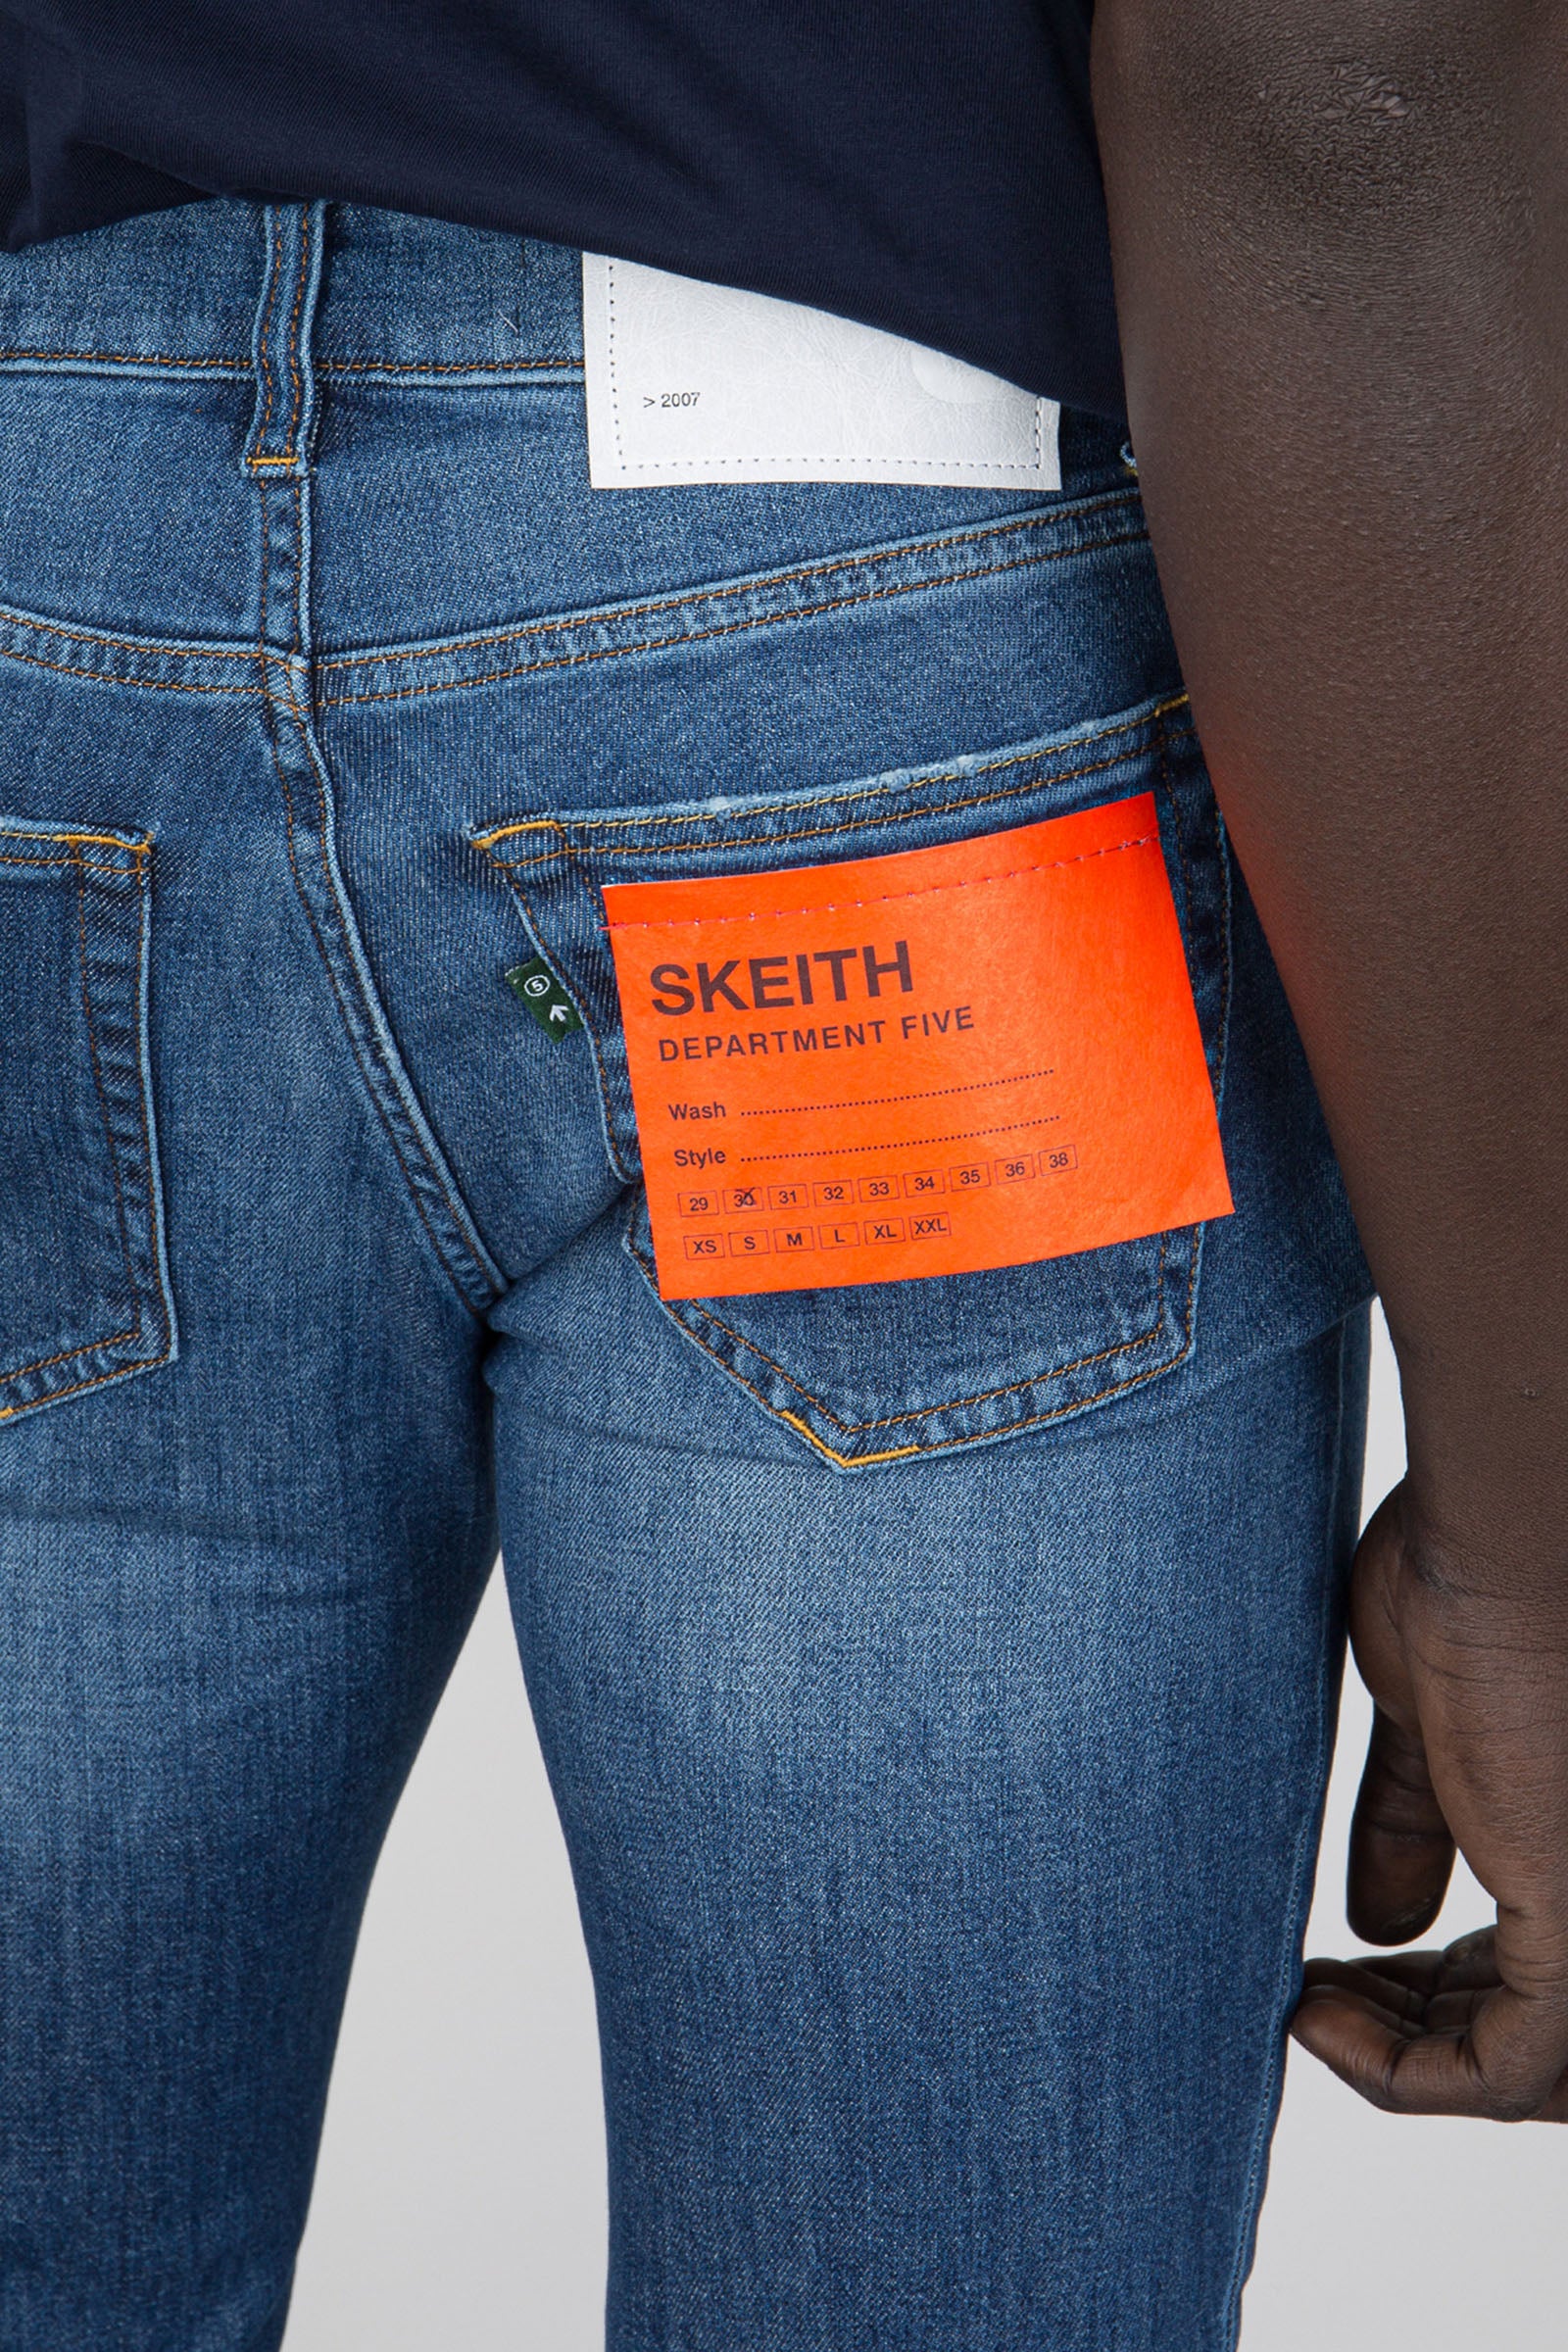 Skeith Jeans - 5